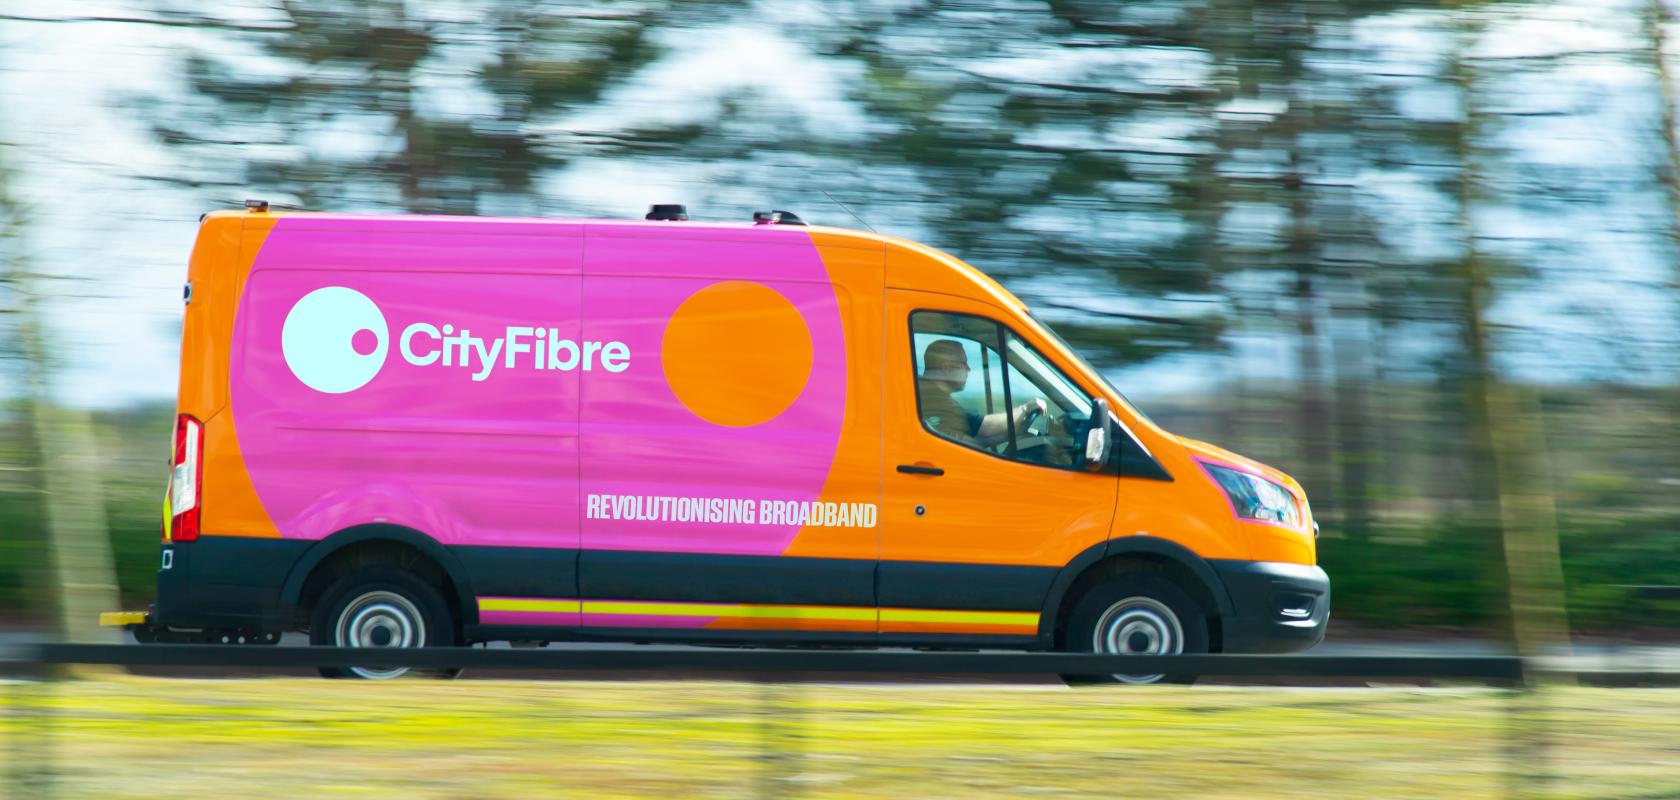 CityFibre has been awarded five new contracts under the government’s £5bn Project Gigabit programme